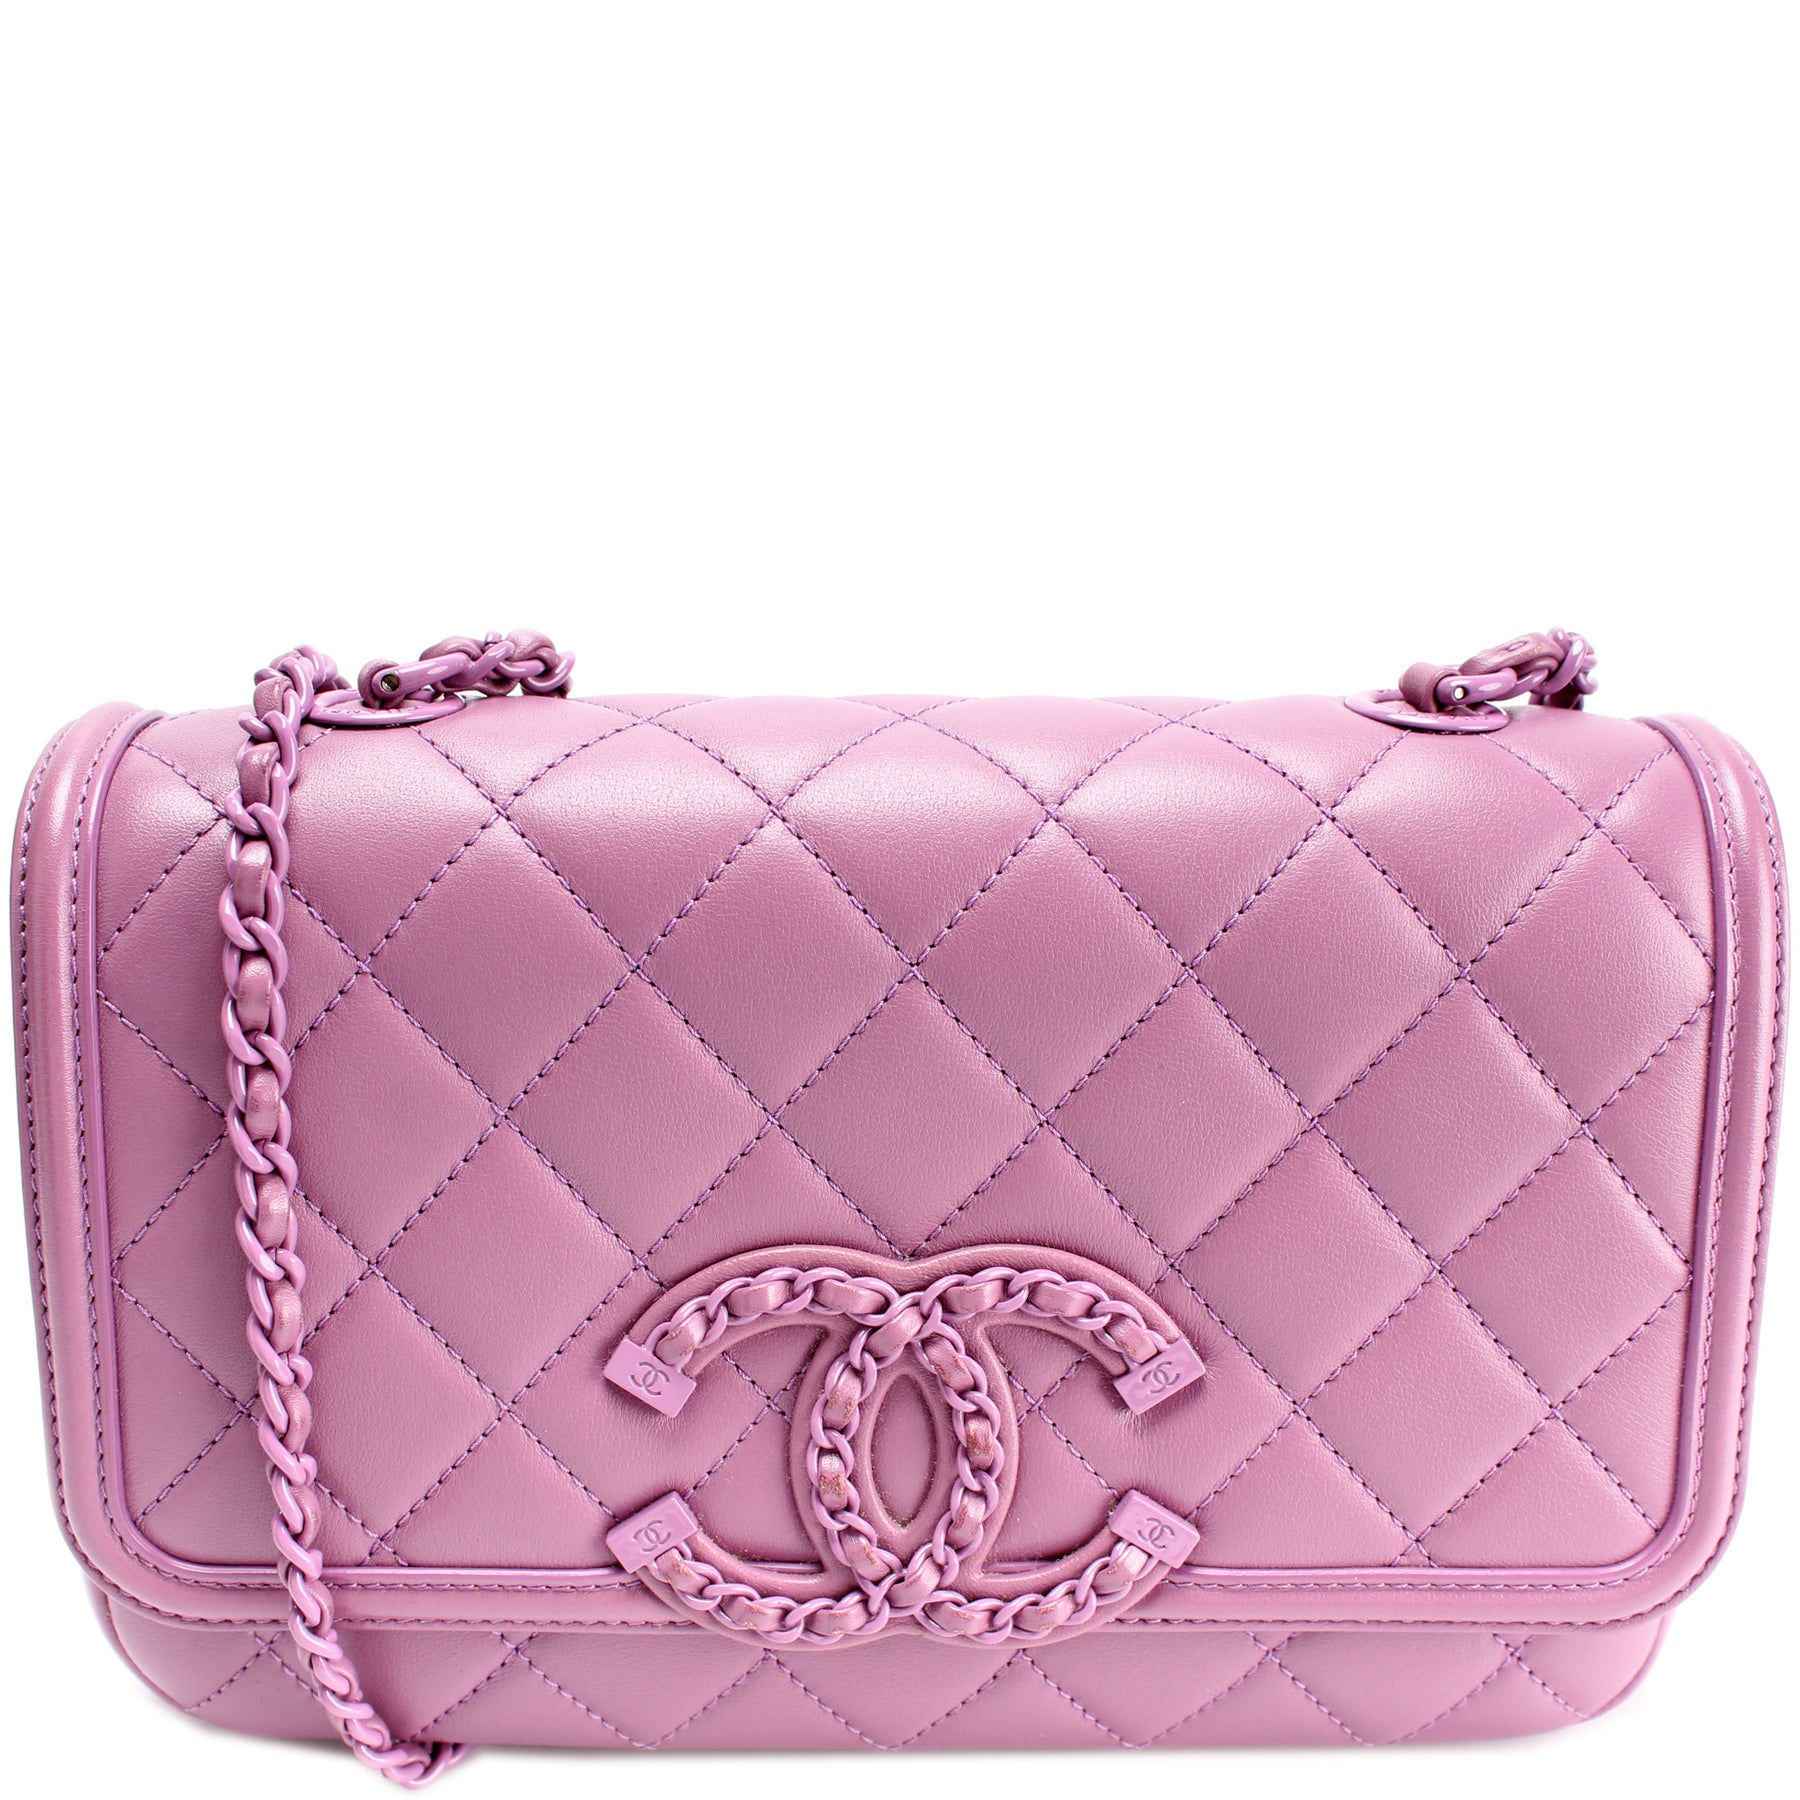 Chanel Bags on Sale: Chanel Evening Shoulder Bag 100% Authentic 80% Off